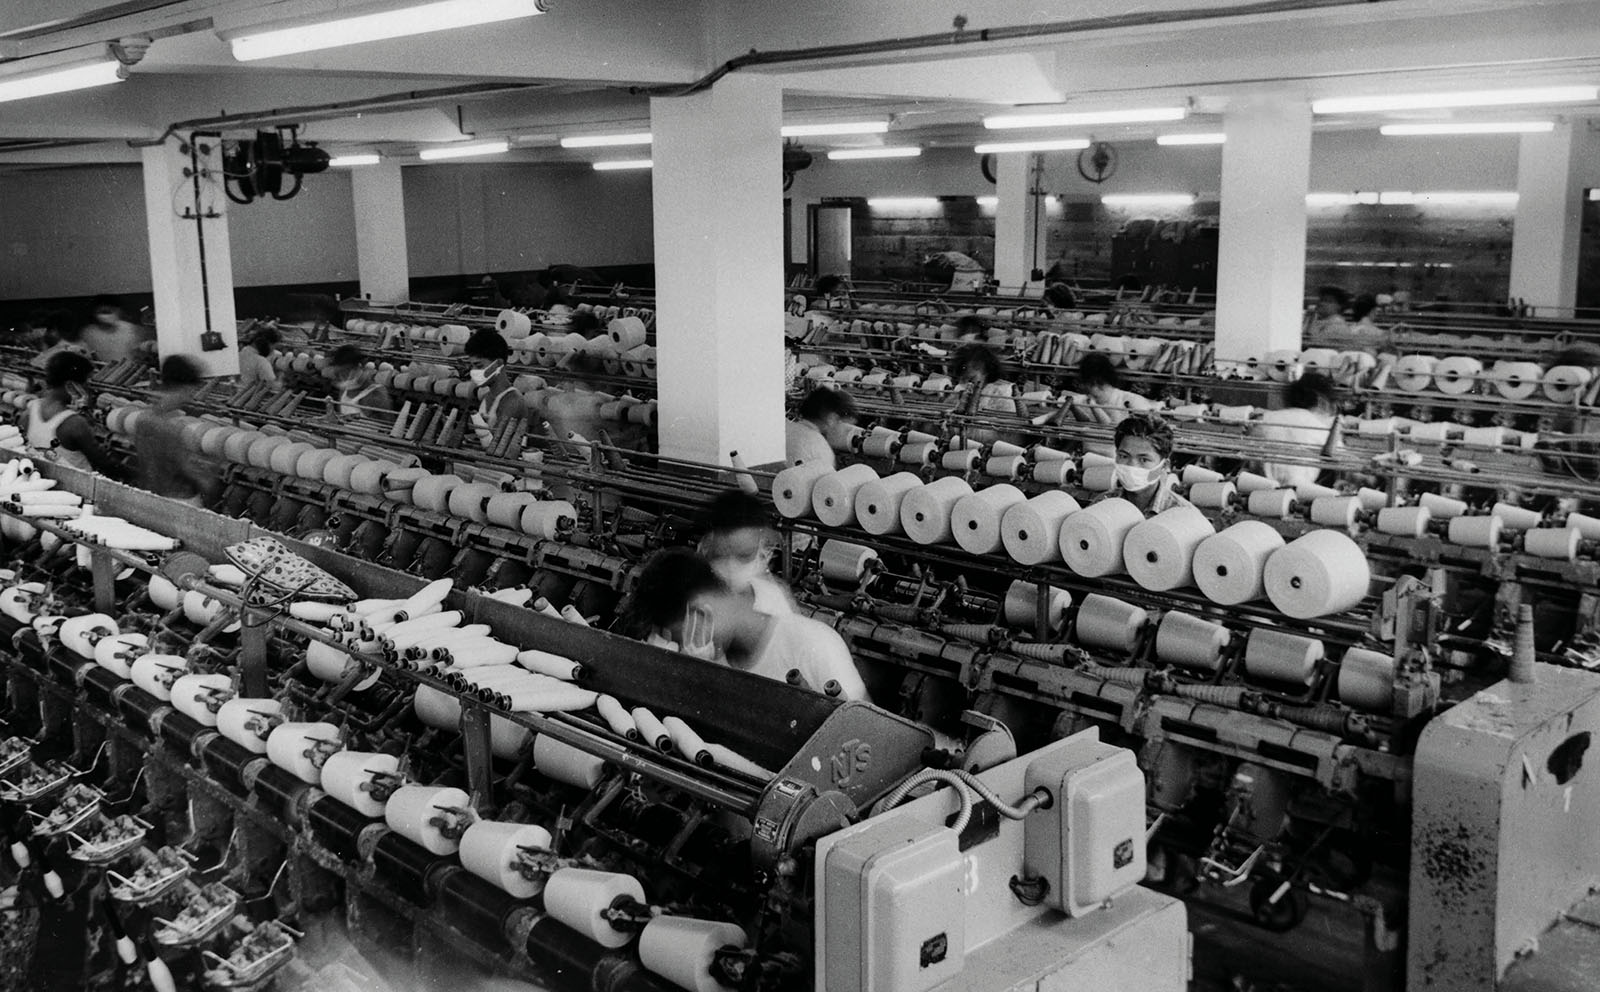 Hong Kong, The Mills, Textile industry